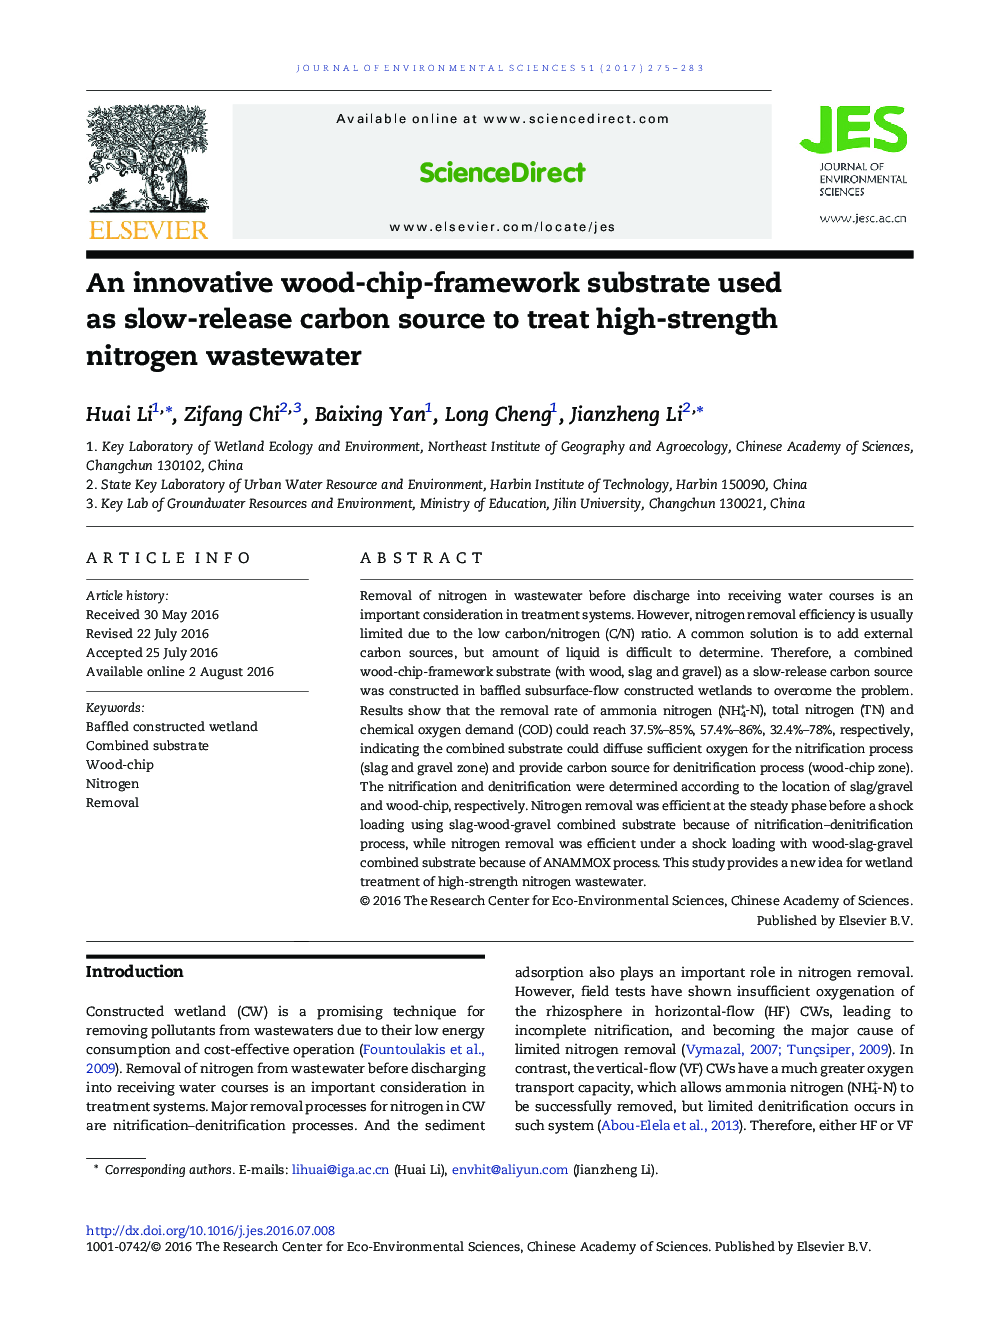 An innovative wood-chip-framework substrate used as slow-release carbon source to treat high-strength nitrogen wastewater